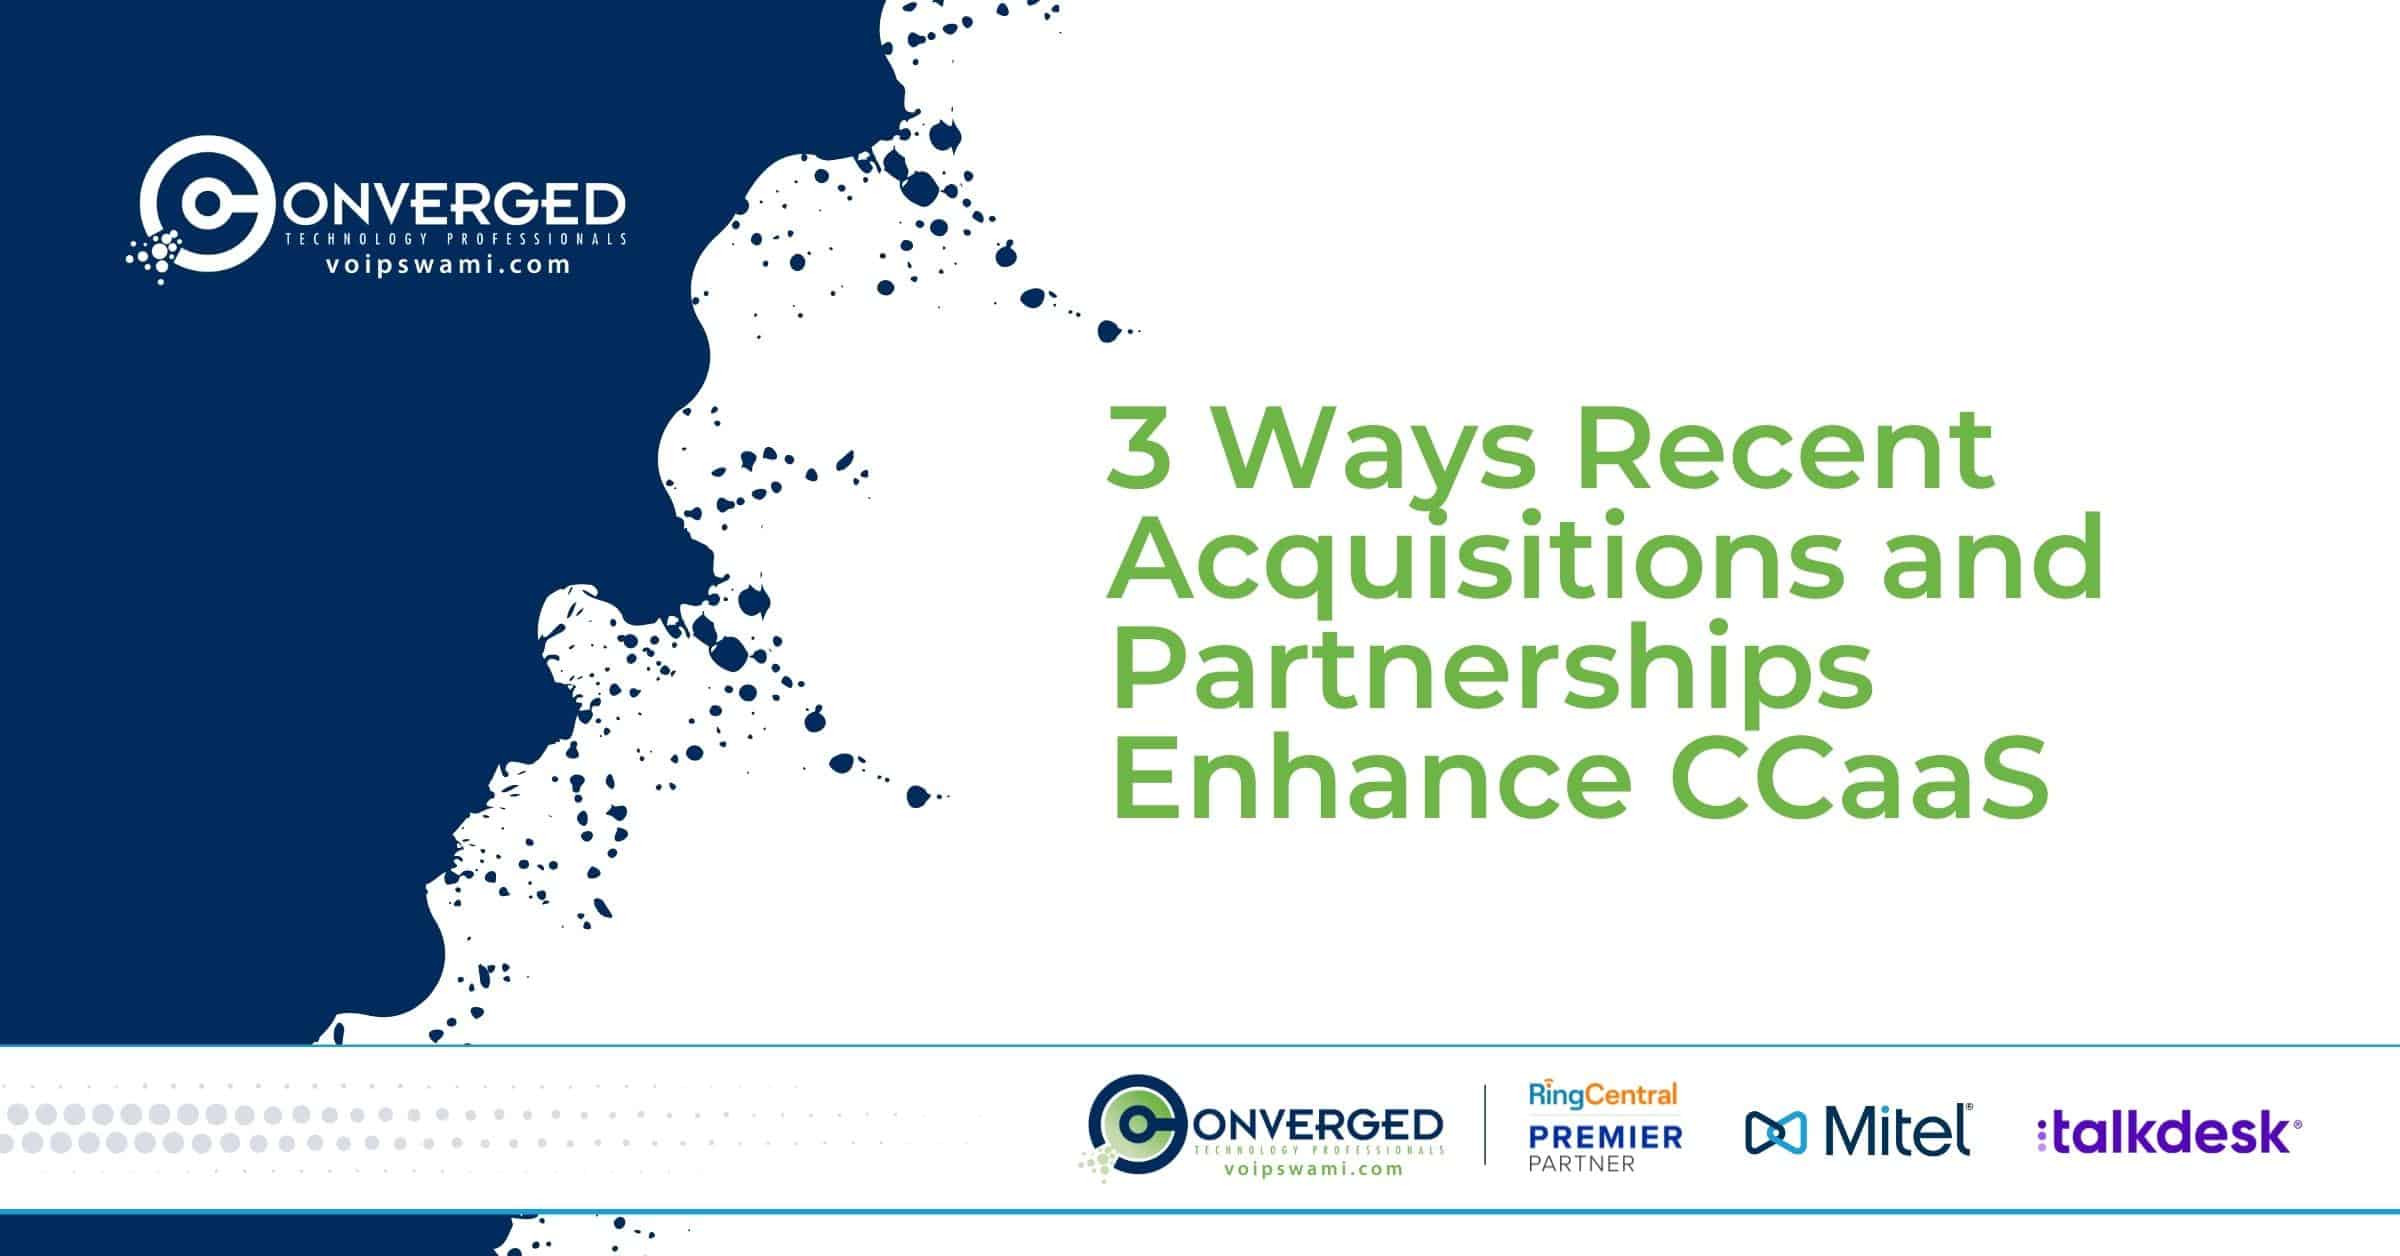 3 Ways Recent Acquisitions and Partnerships Enhance CCaaS